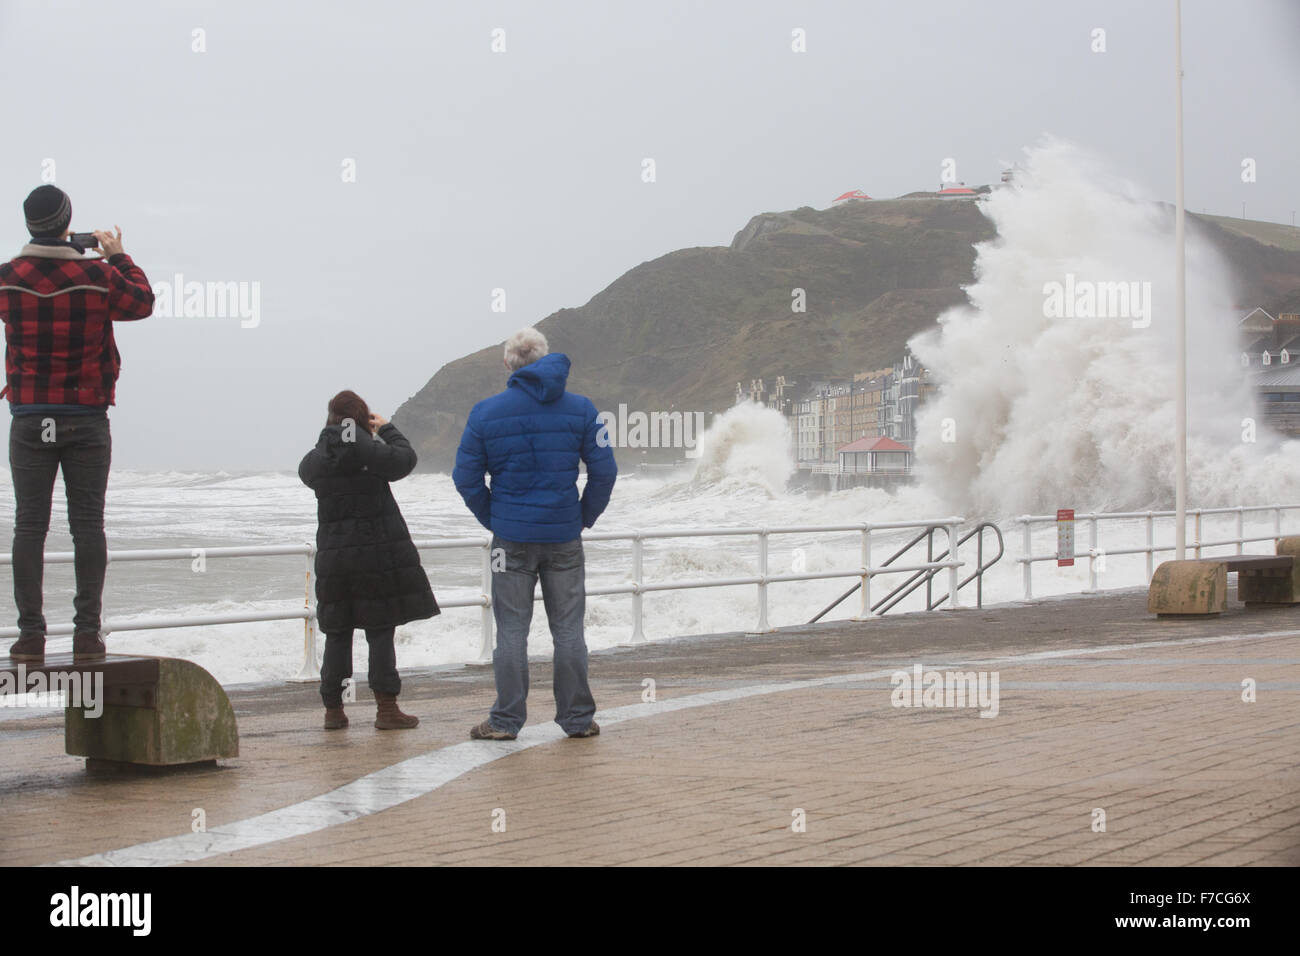 Aberystwyth, Wales, UK. 29th November 2015 Three pedestrians watch and take photos as the big waves batter Aberystwyth this morning as storm Clodagh combines with high tide. Credit:  Ian Jones/Alamy Live News Stock Photo